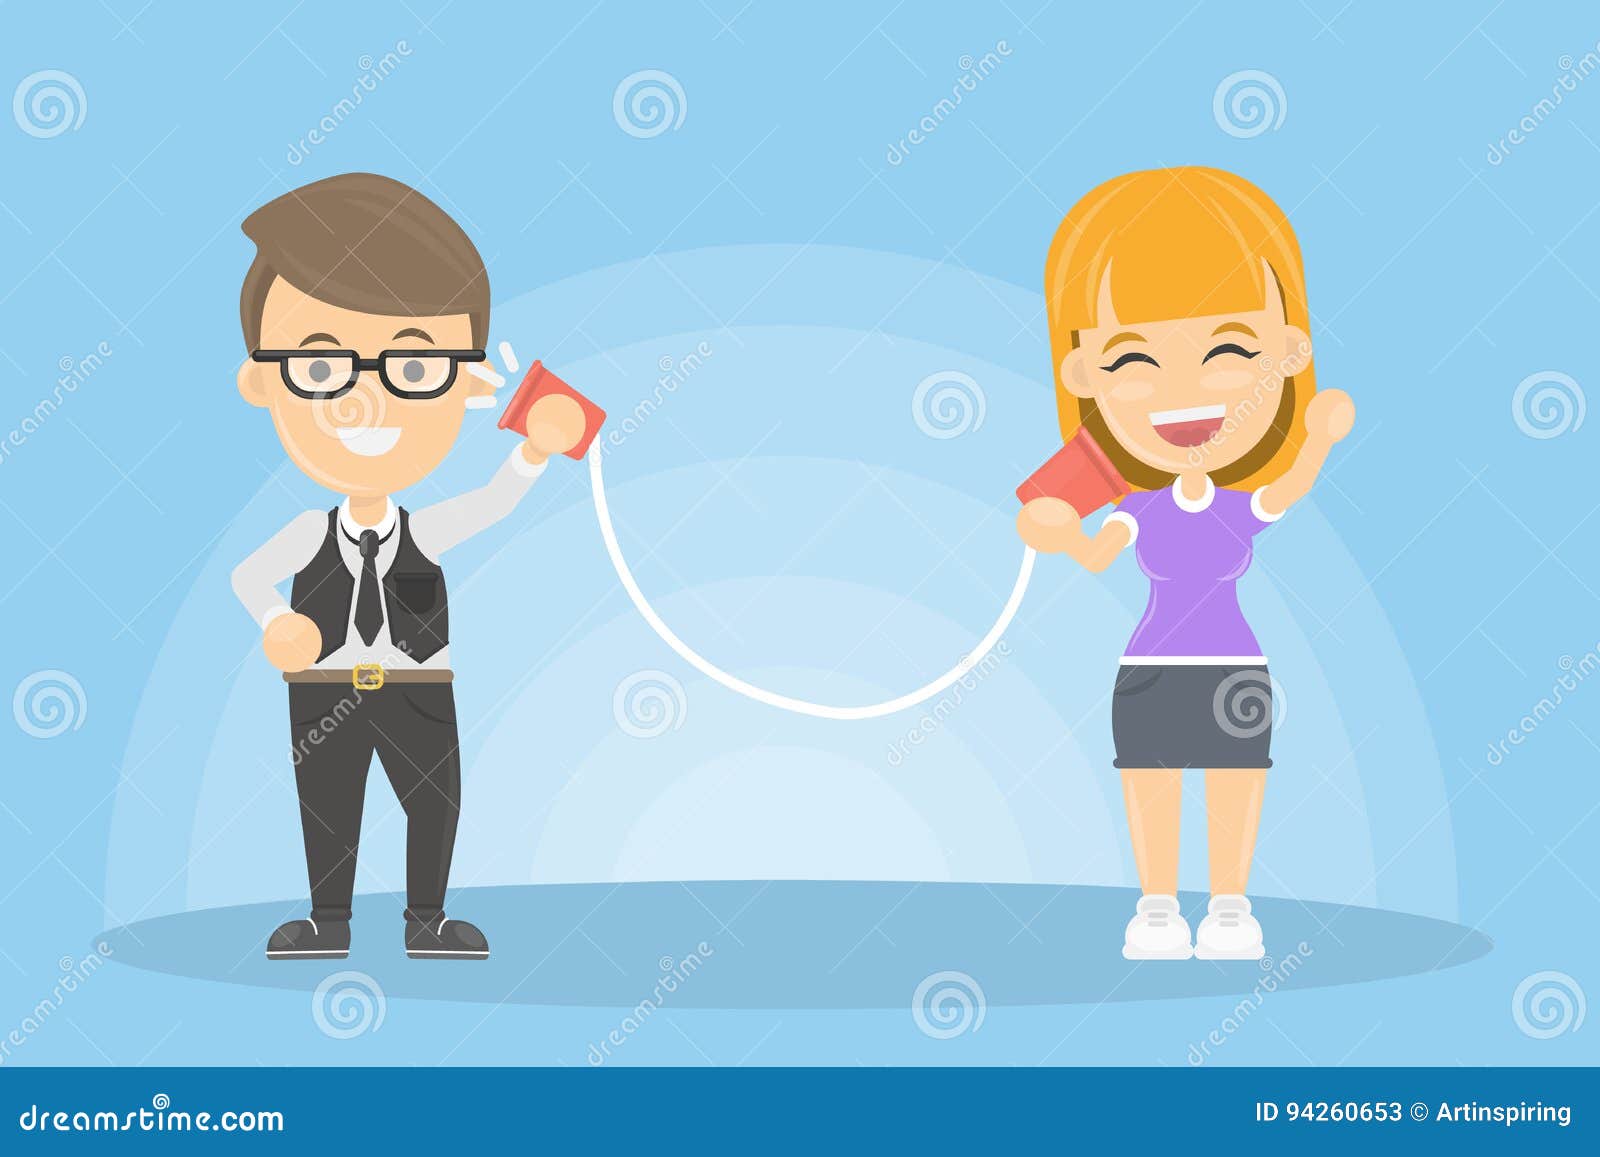 What with a partner answer. Speak with partner. Speak with a partner картинка для детей на белом фоне. Speaking with partner illustration. Talk through.